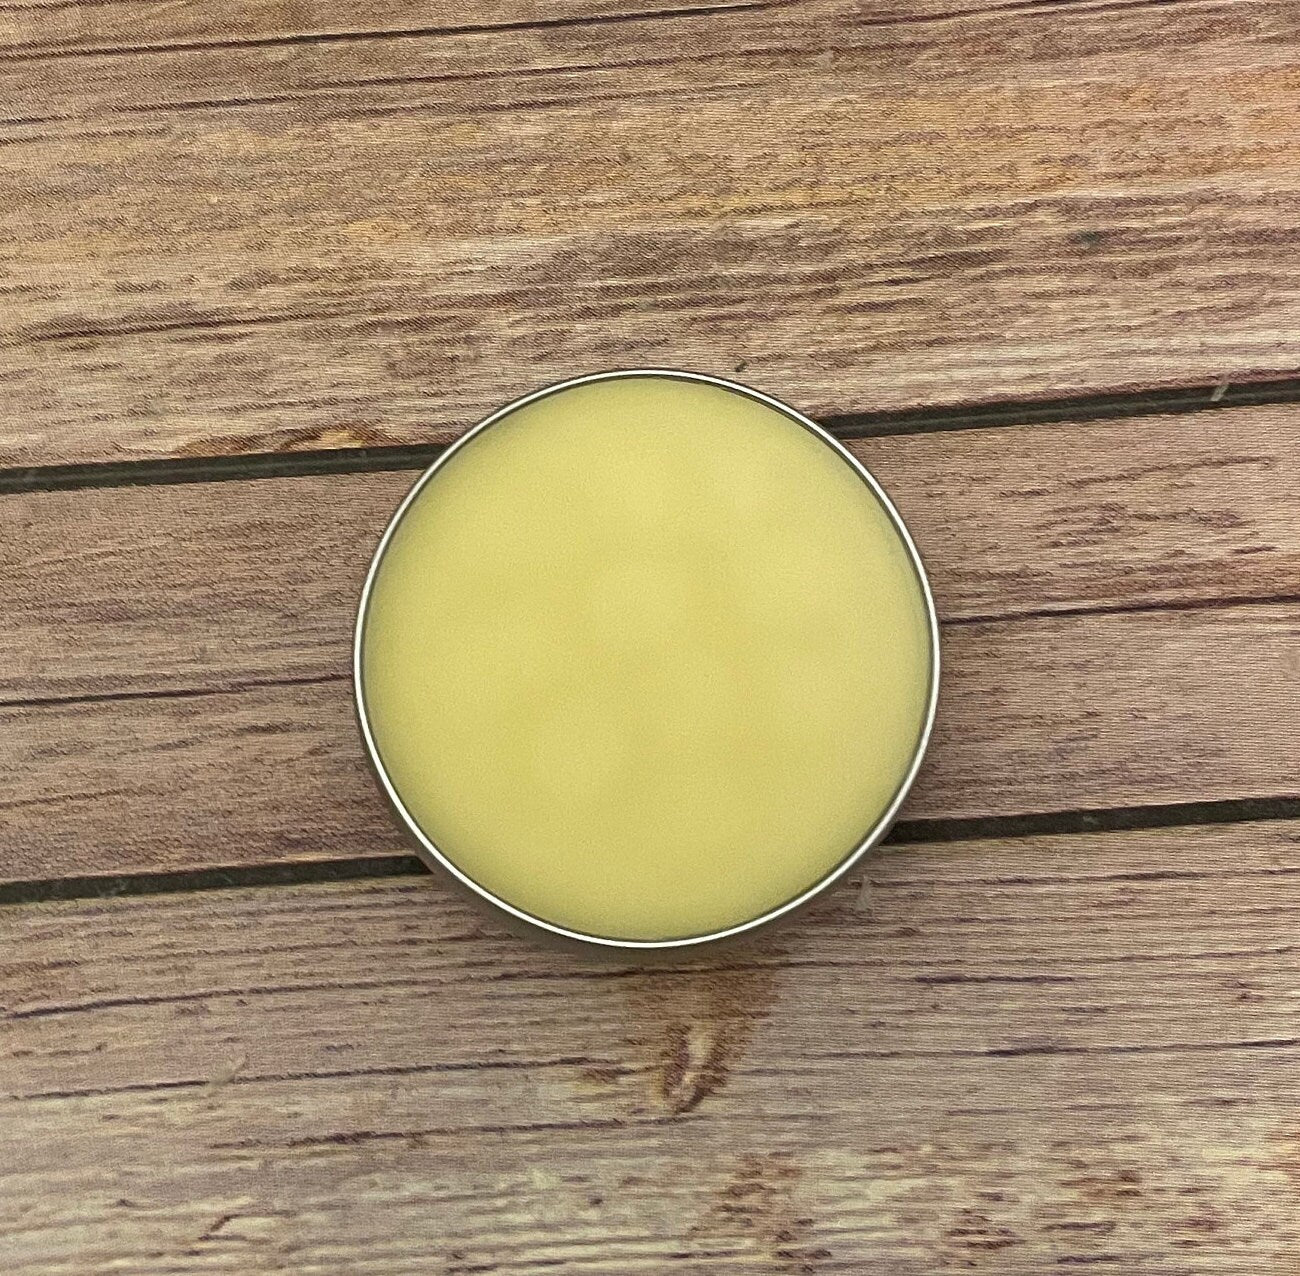 Ivy Creek Mountain Man Beard Balm | Natural Conditioning for Your Manly Whiskers | 2 oz | Ready to Ship